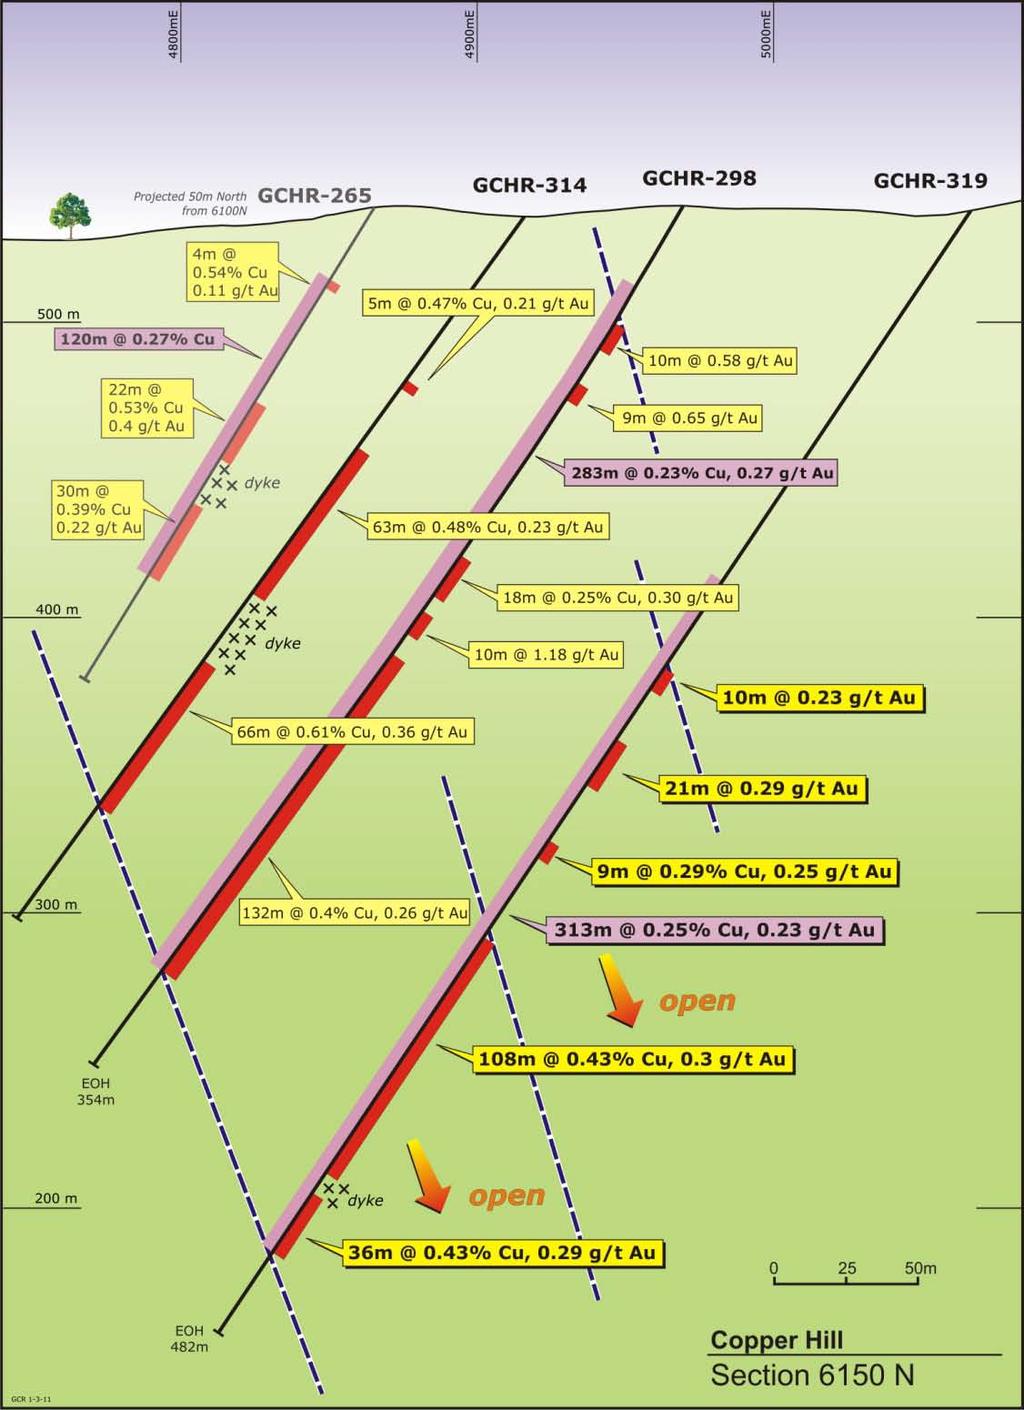 200 metres Buckley s Hill, Section 6150N Big & expanding zone indicated Copper and gold grades remain elevated and above average.